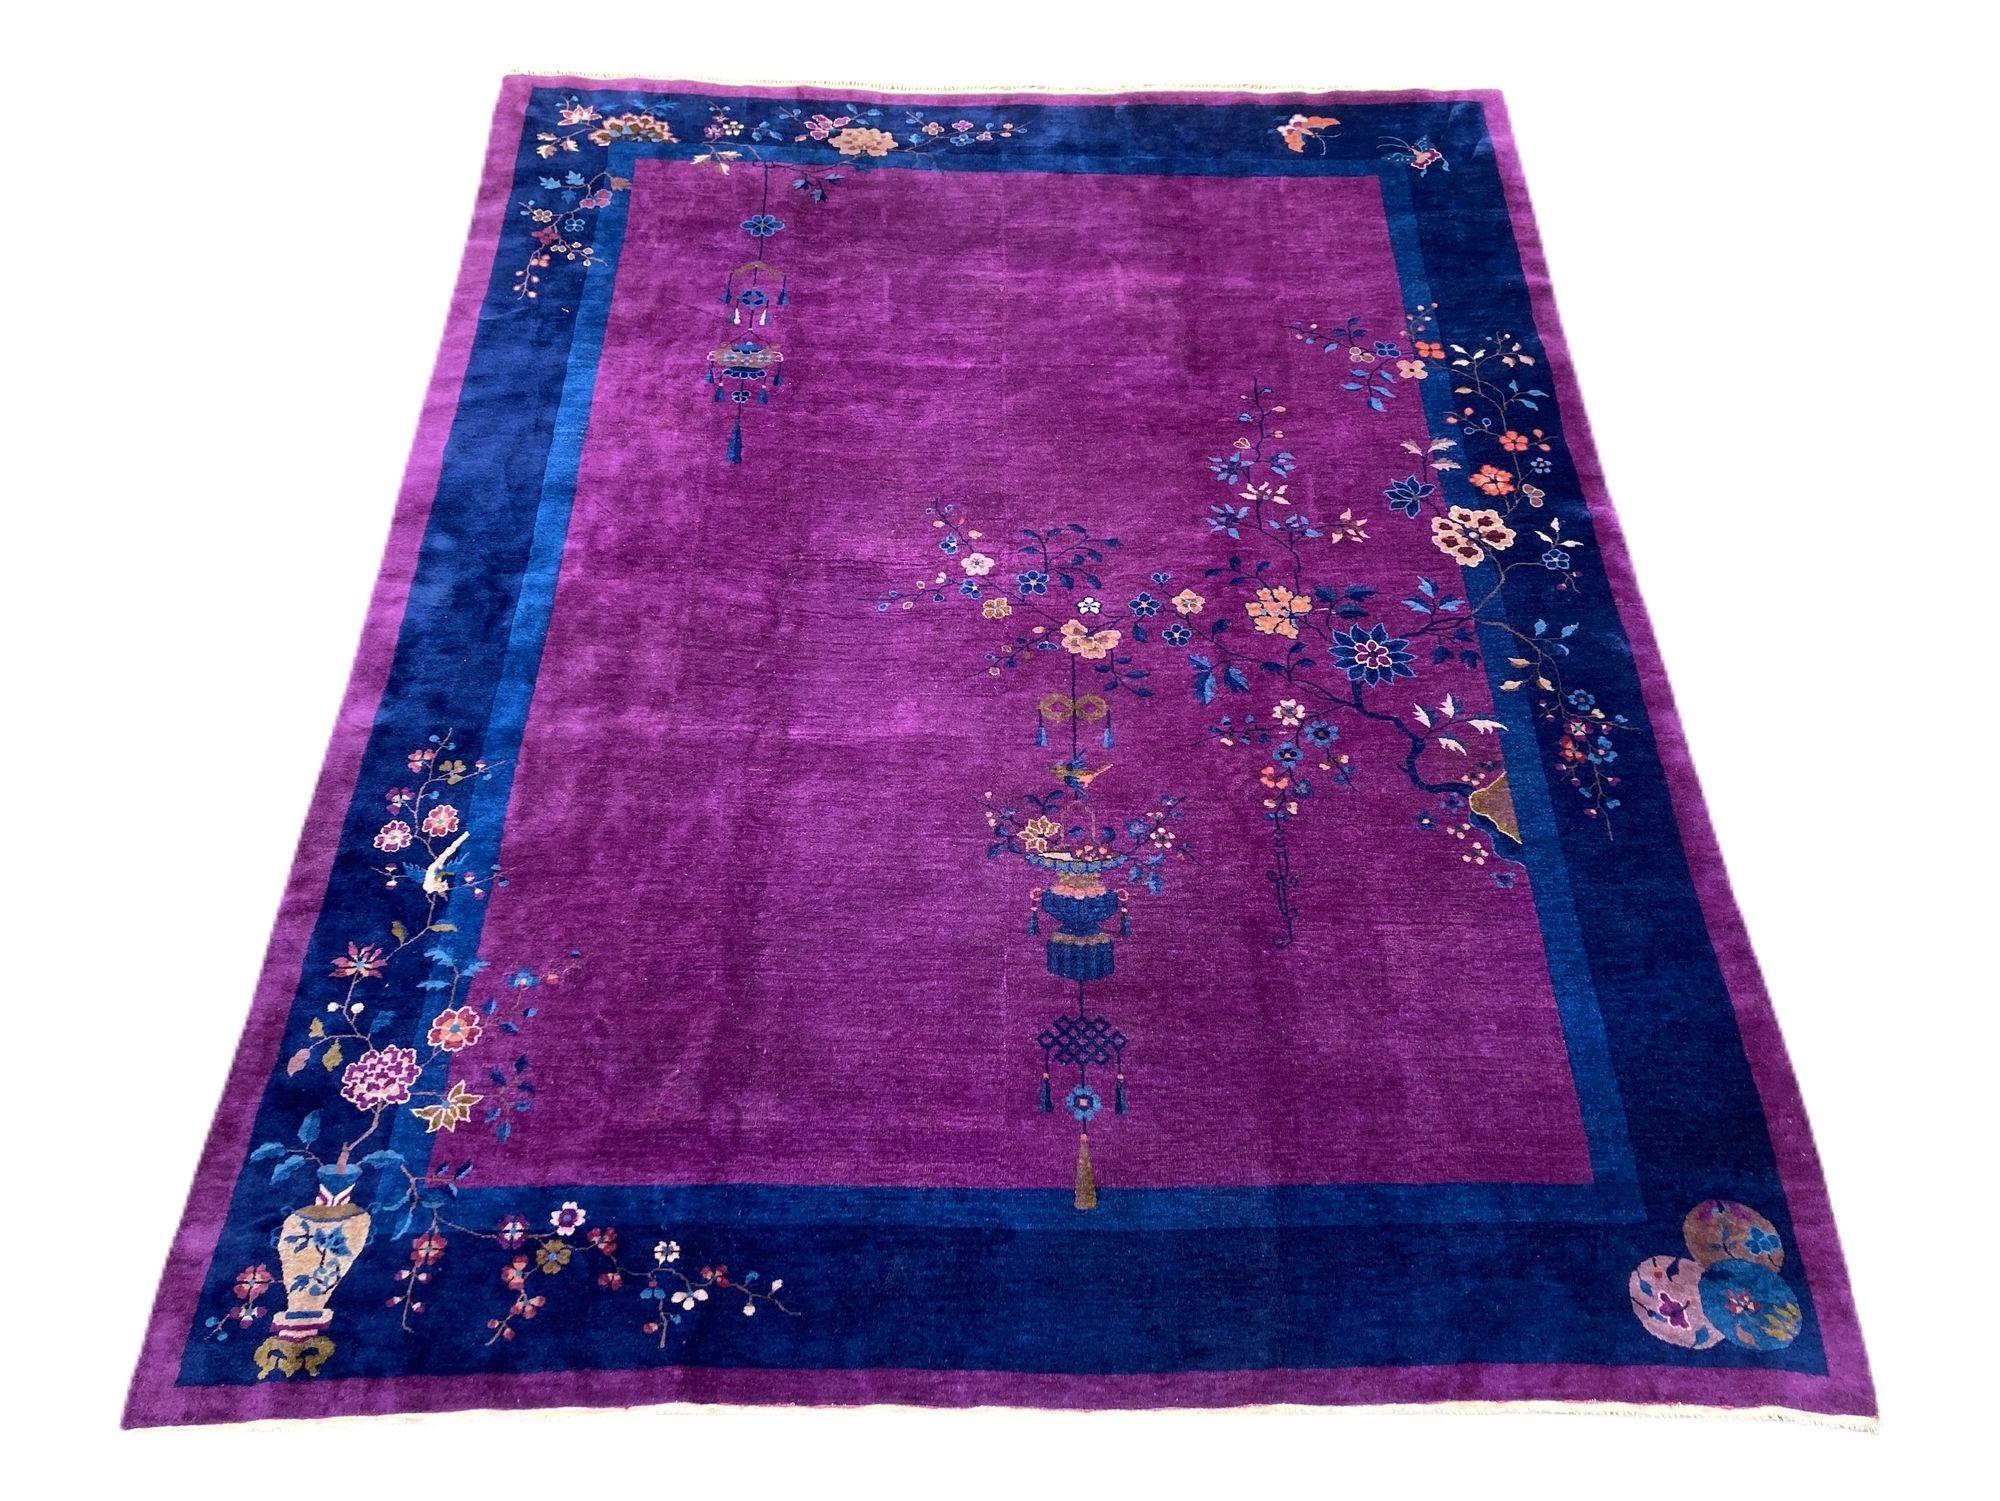 A beautiful example of an antique Art Deco carpet, hand woven in Tianjin, north-east China, circa 1920s with a simple design of floral sprays and hanging lantern on a purple field and dark indigo border.
Size: 3.43m x 2.74m (11ft 3in x 9ft)
This